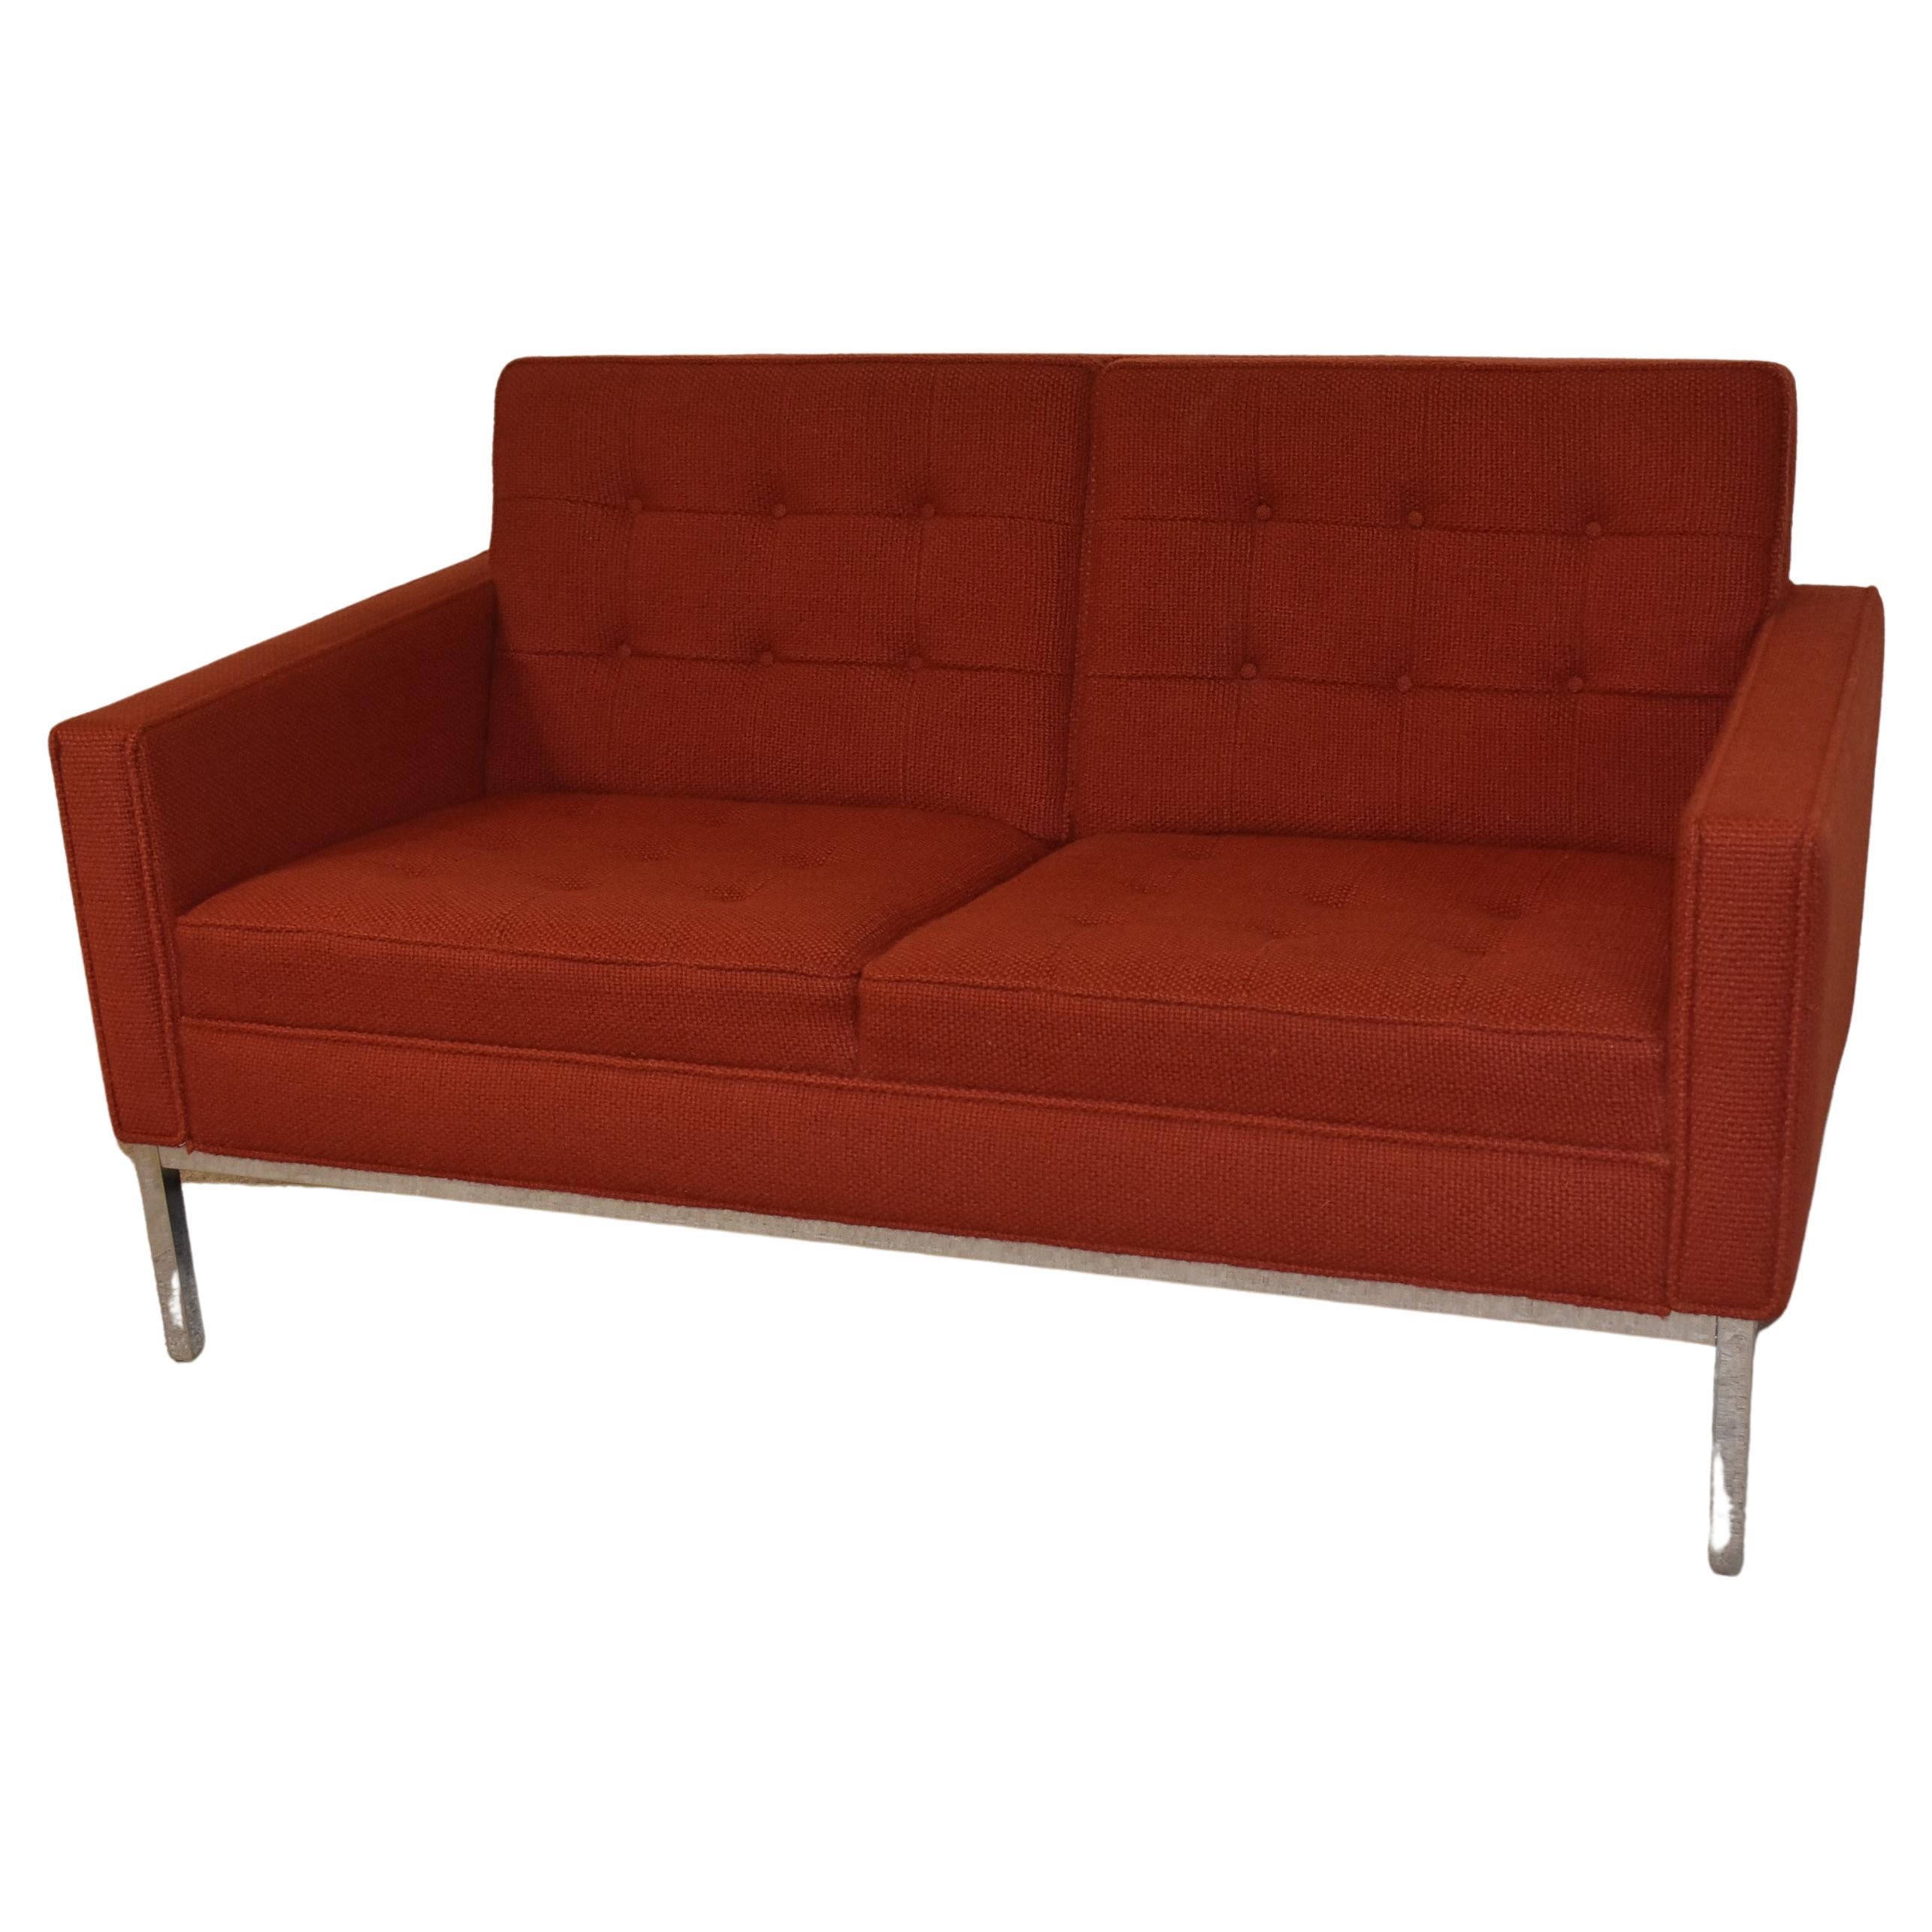 Knoll Loveseat with Burnt Orange Wool Upholstery and Chrome Legs For Sale